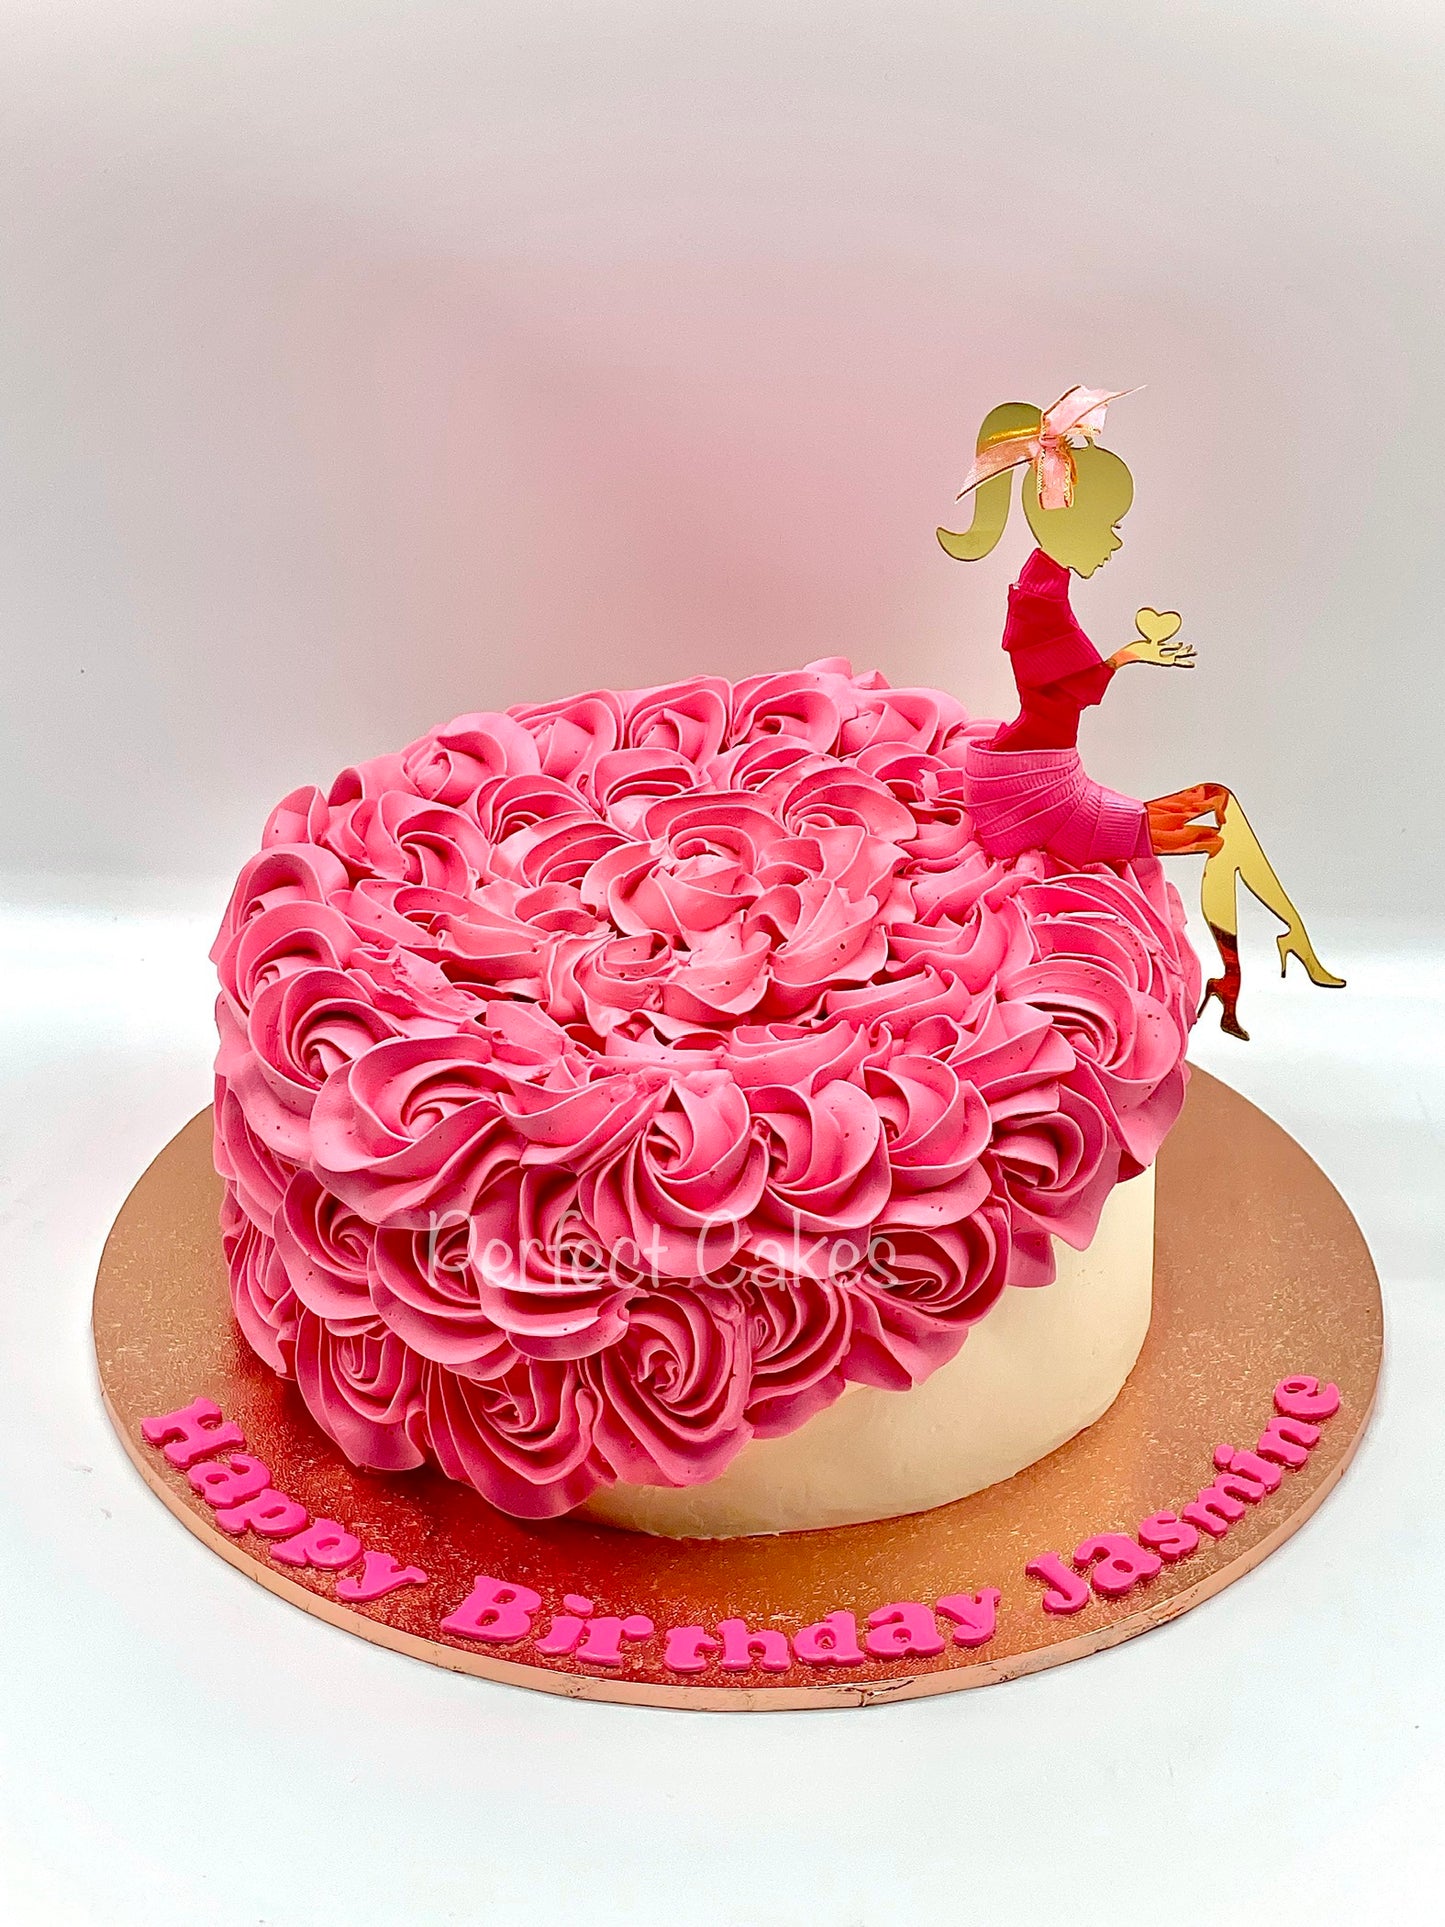 Load image into Gallery viewer, Lady in Dress Cake
